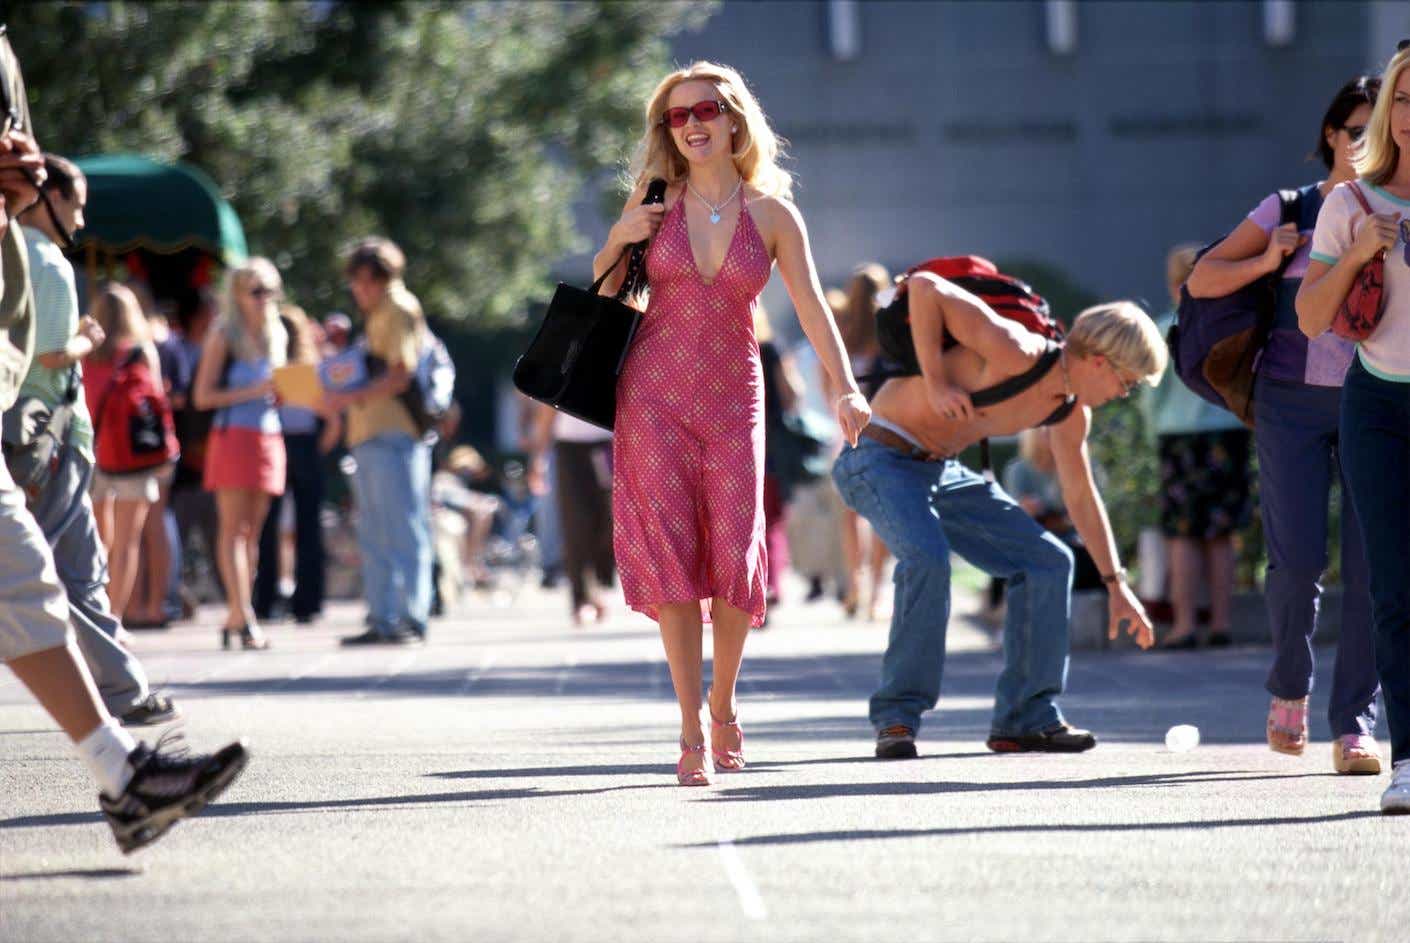 Reese Witherspoon in Legally Blonde walks in a pink dress.